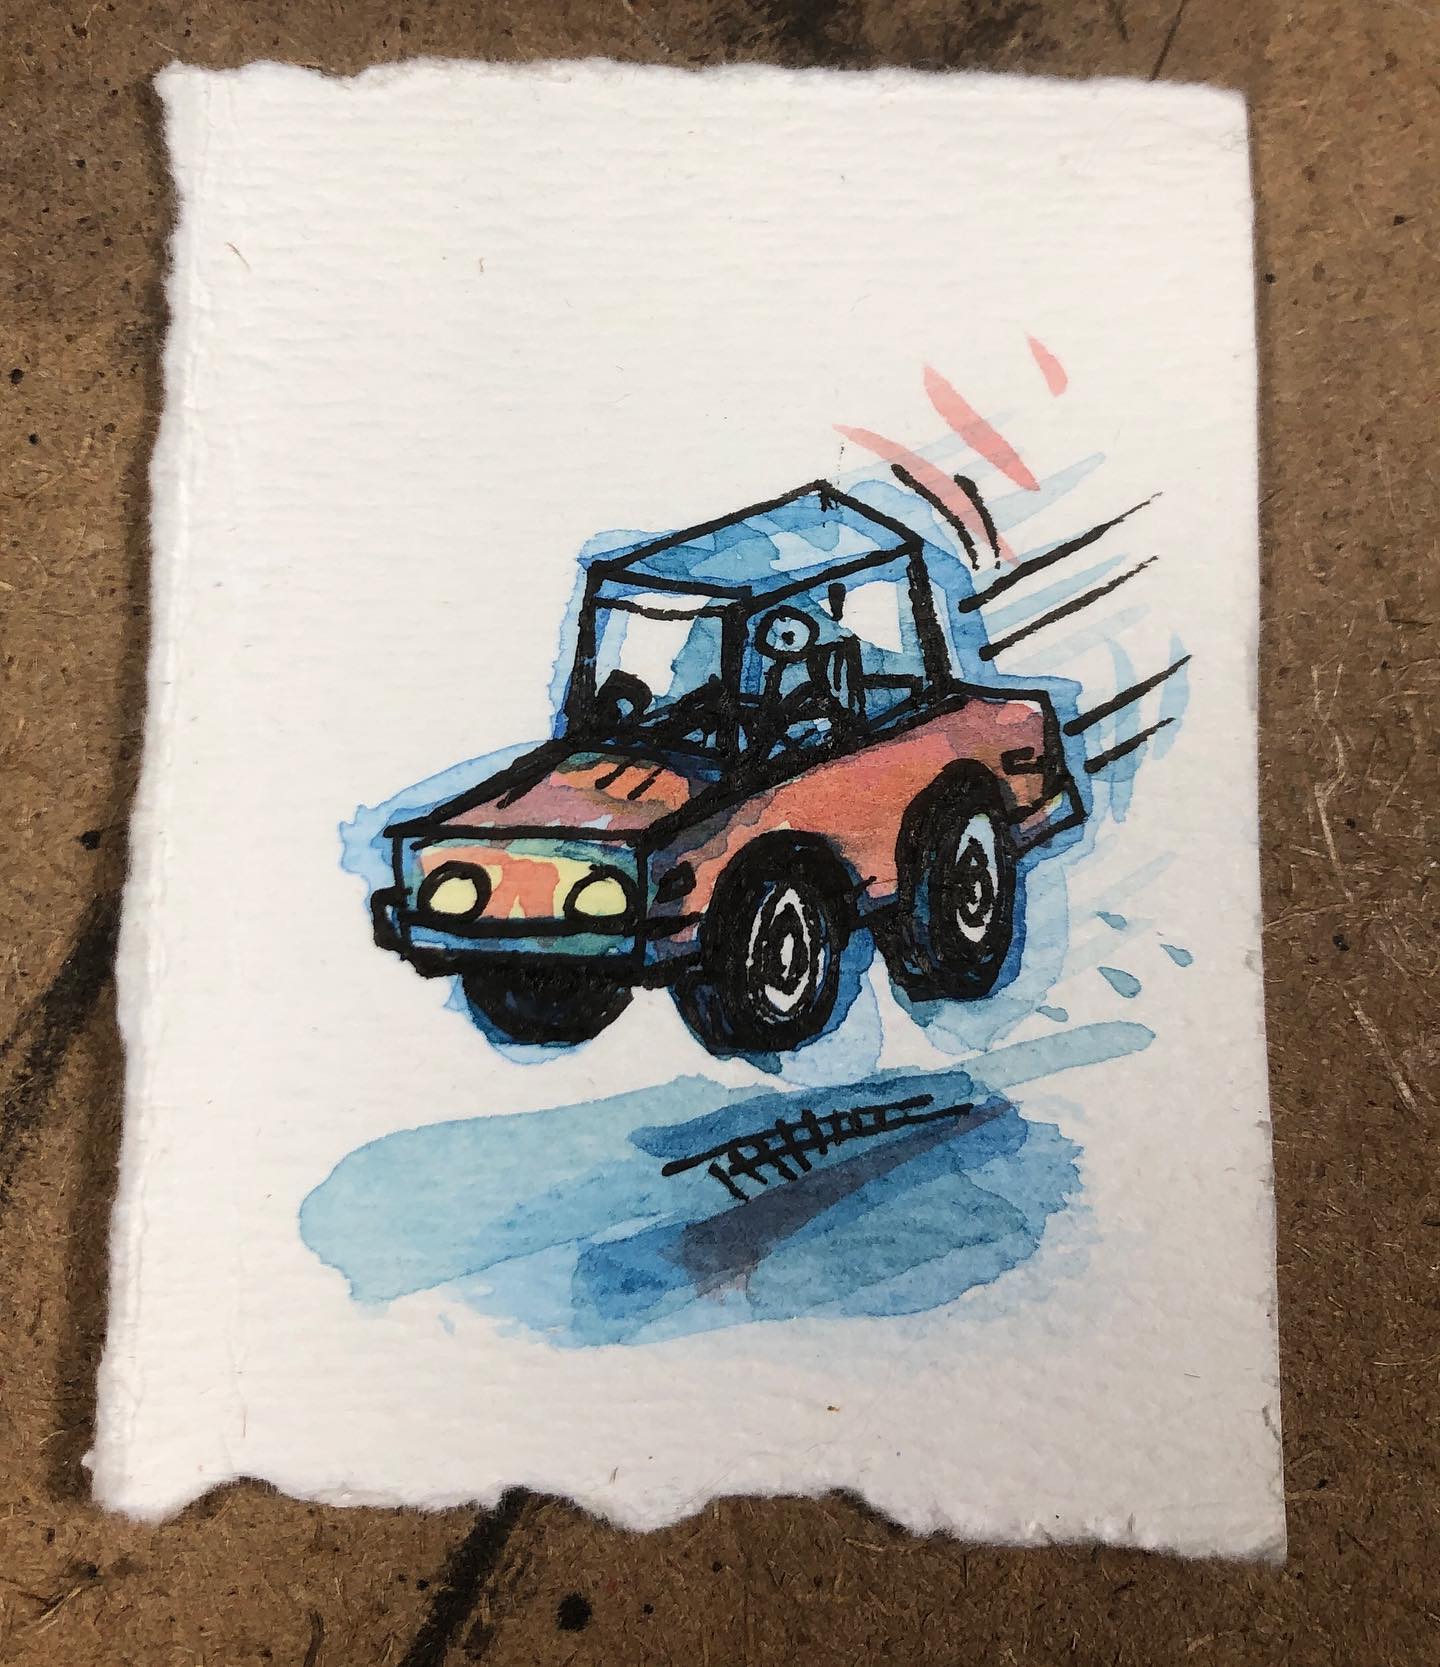 Vehicular Commuter - tiny ink and watercolor drawing of a bouncing and fast moving automobile